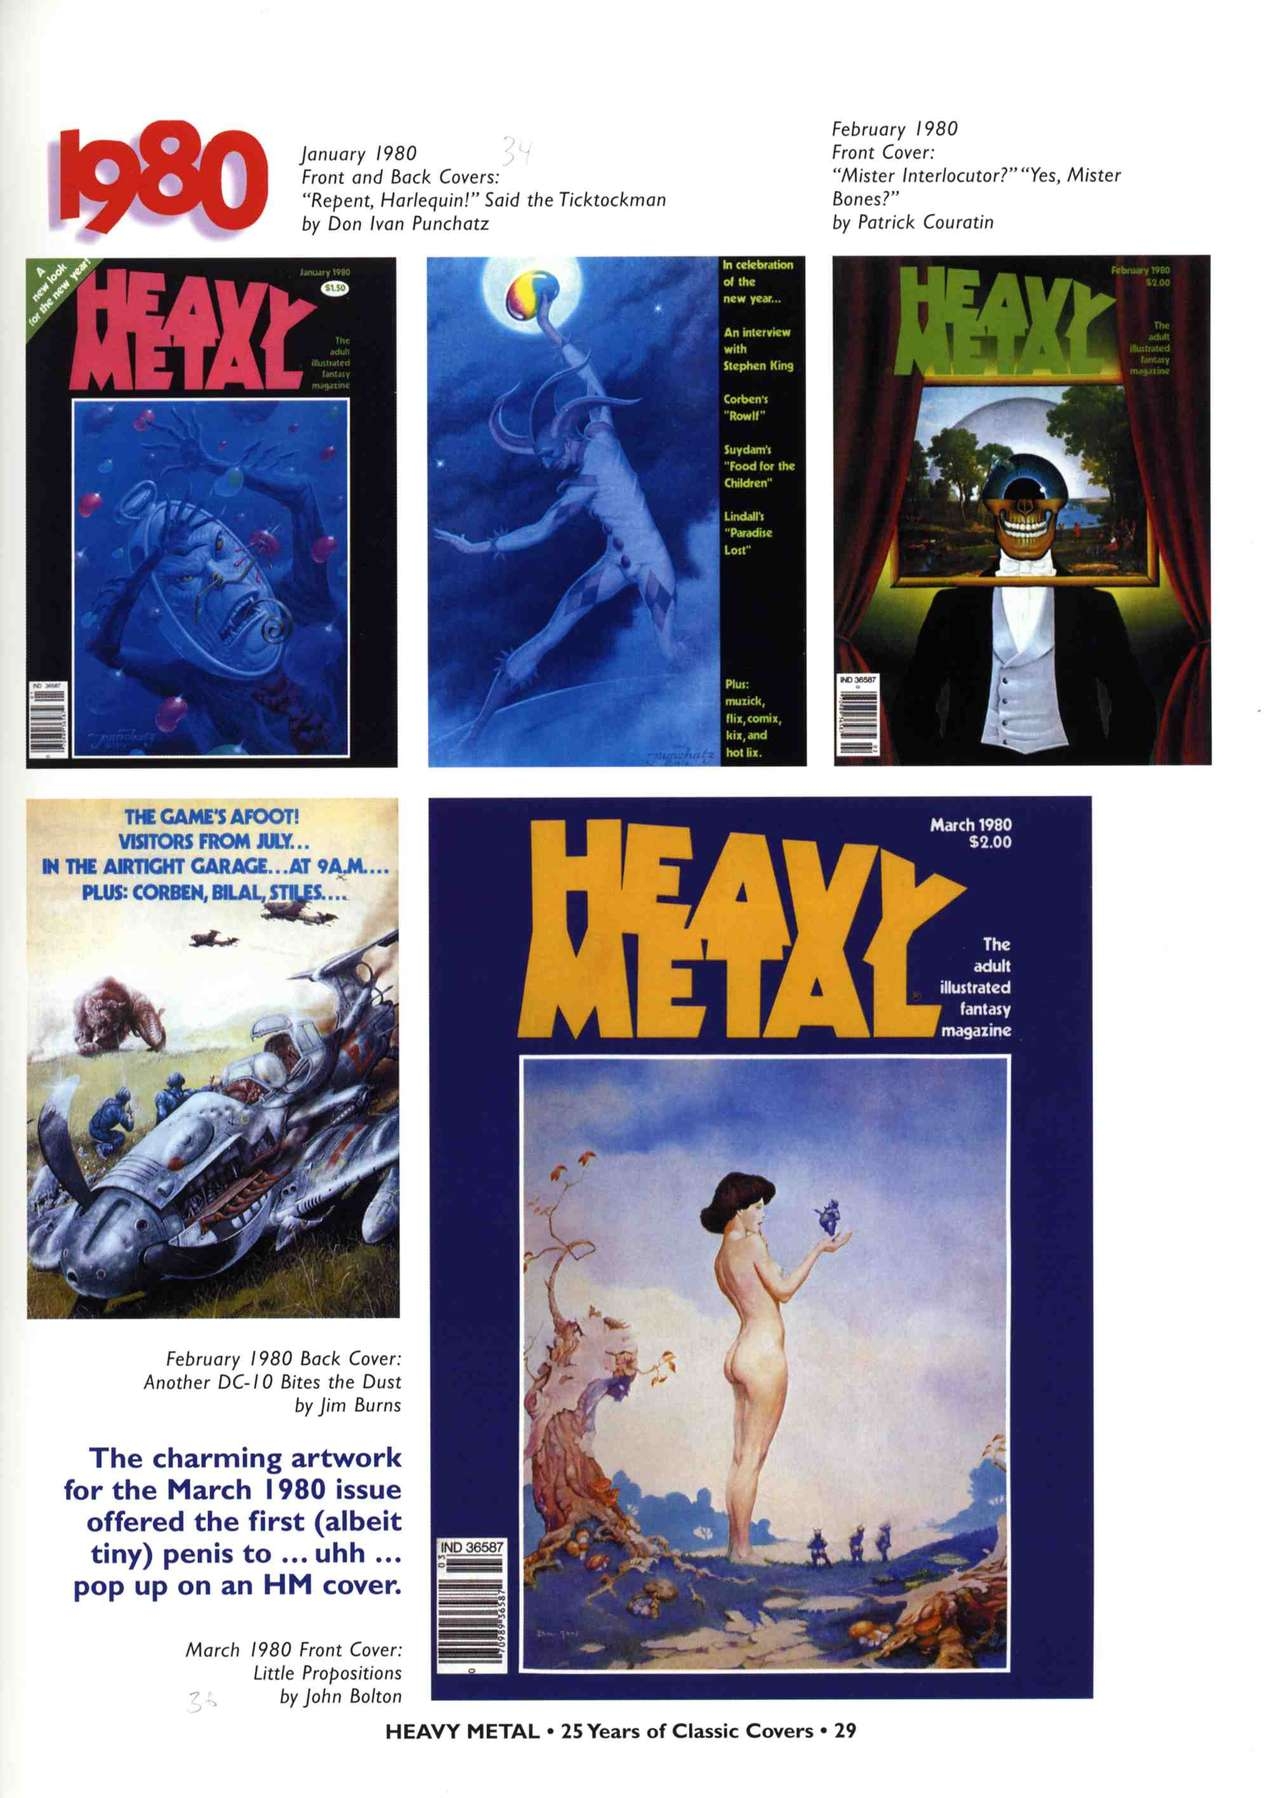 HEAVY METAL 25 Years of Classic Covers 34